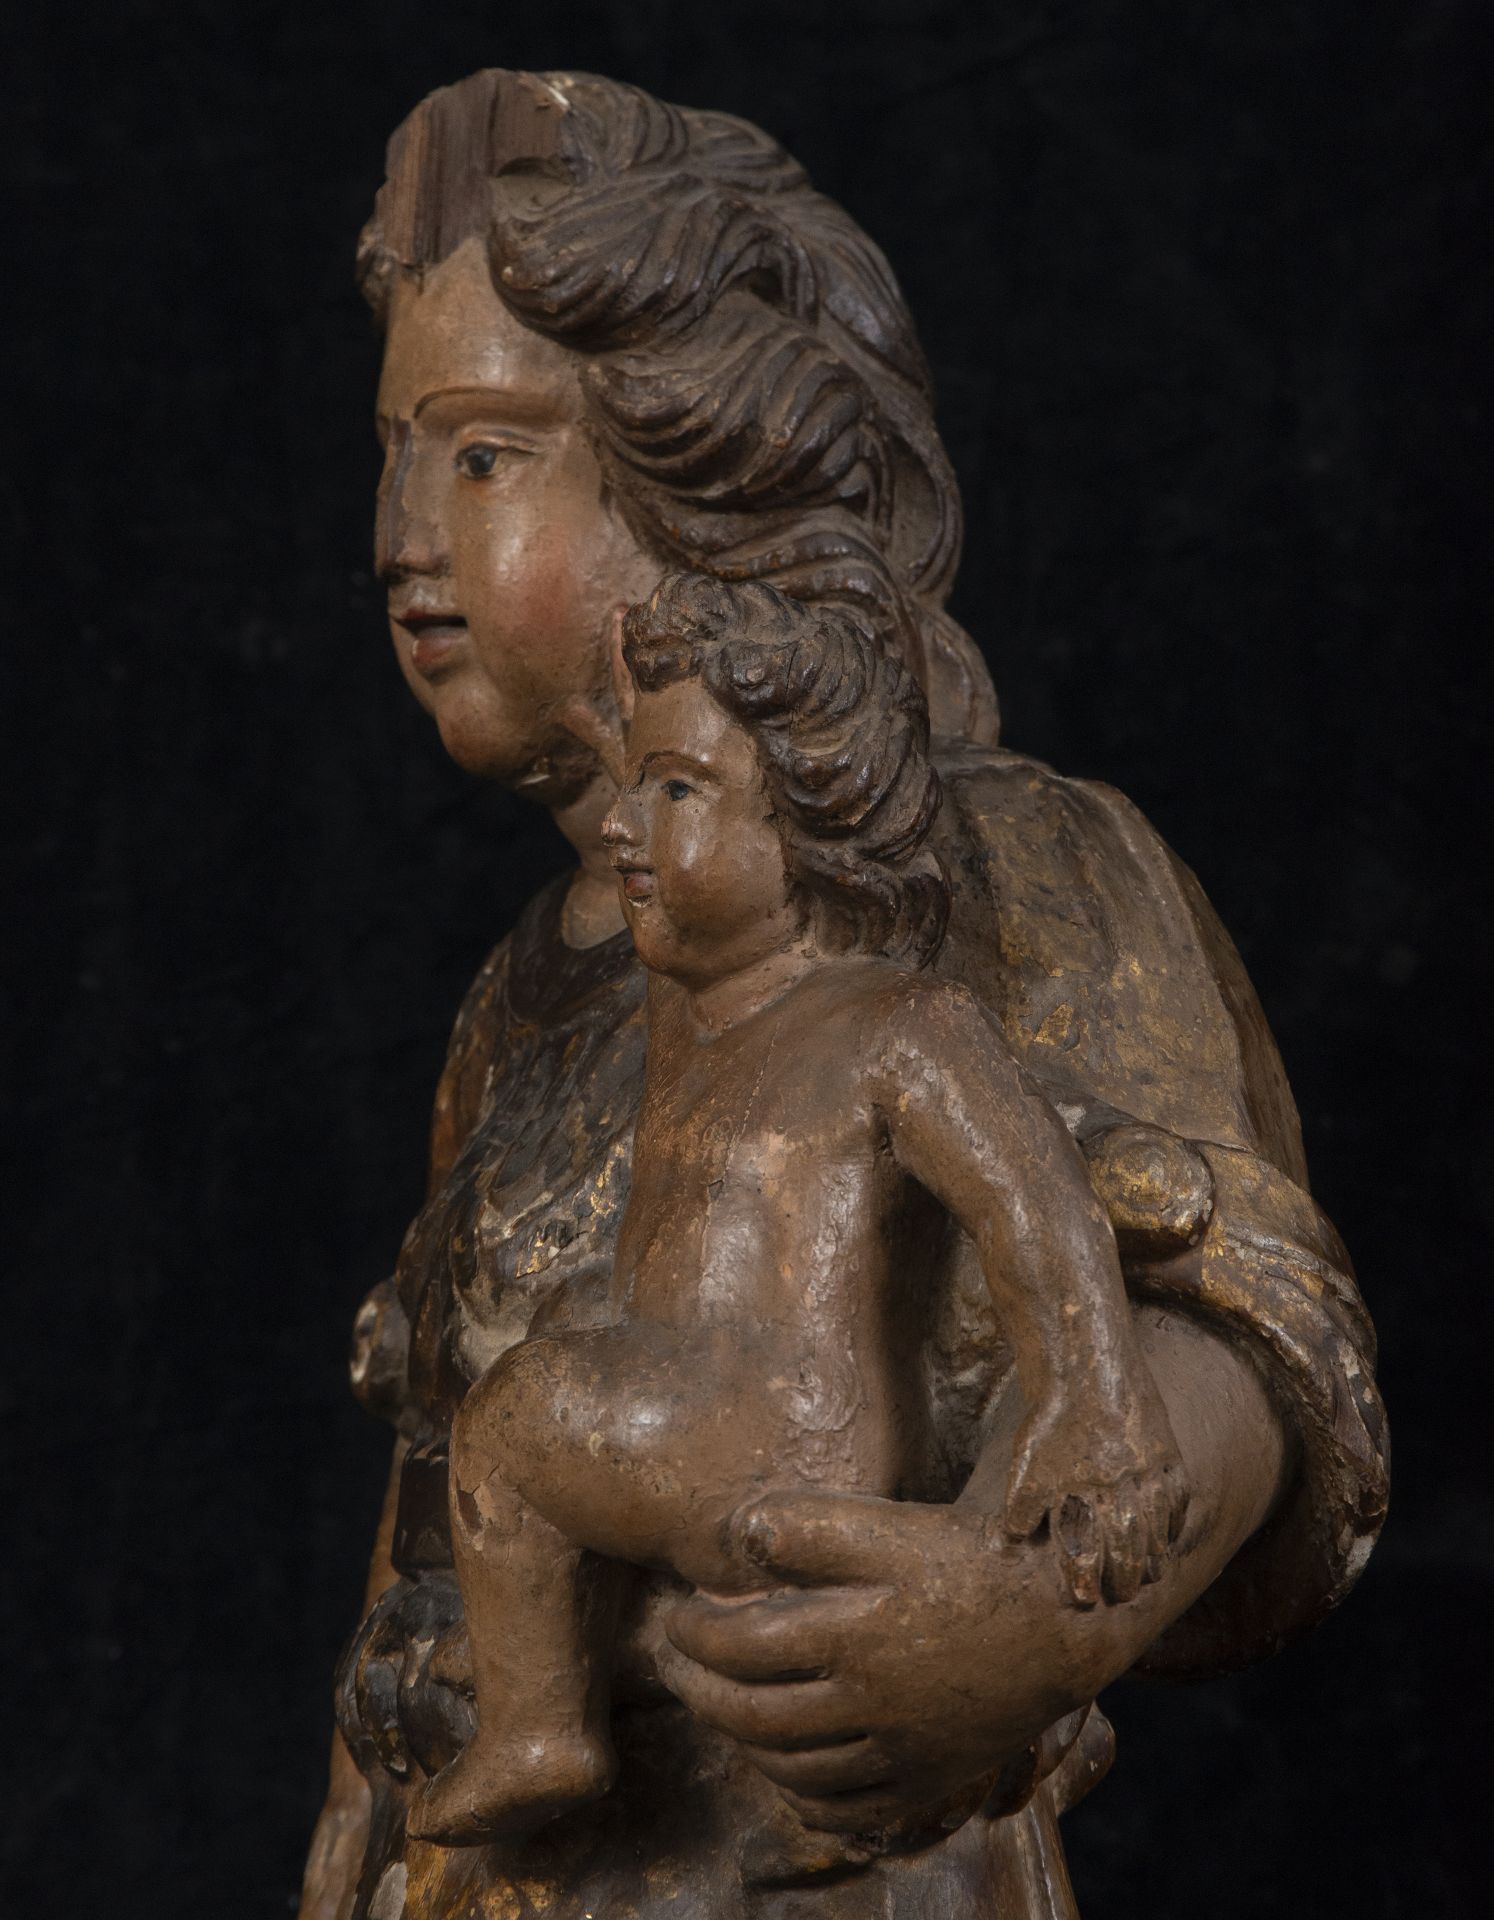 17th century Portuguese Virgin with Child in her arms, 17th century - Image 6 of 10